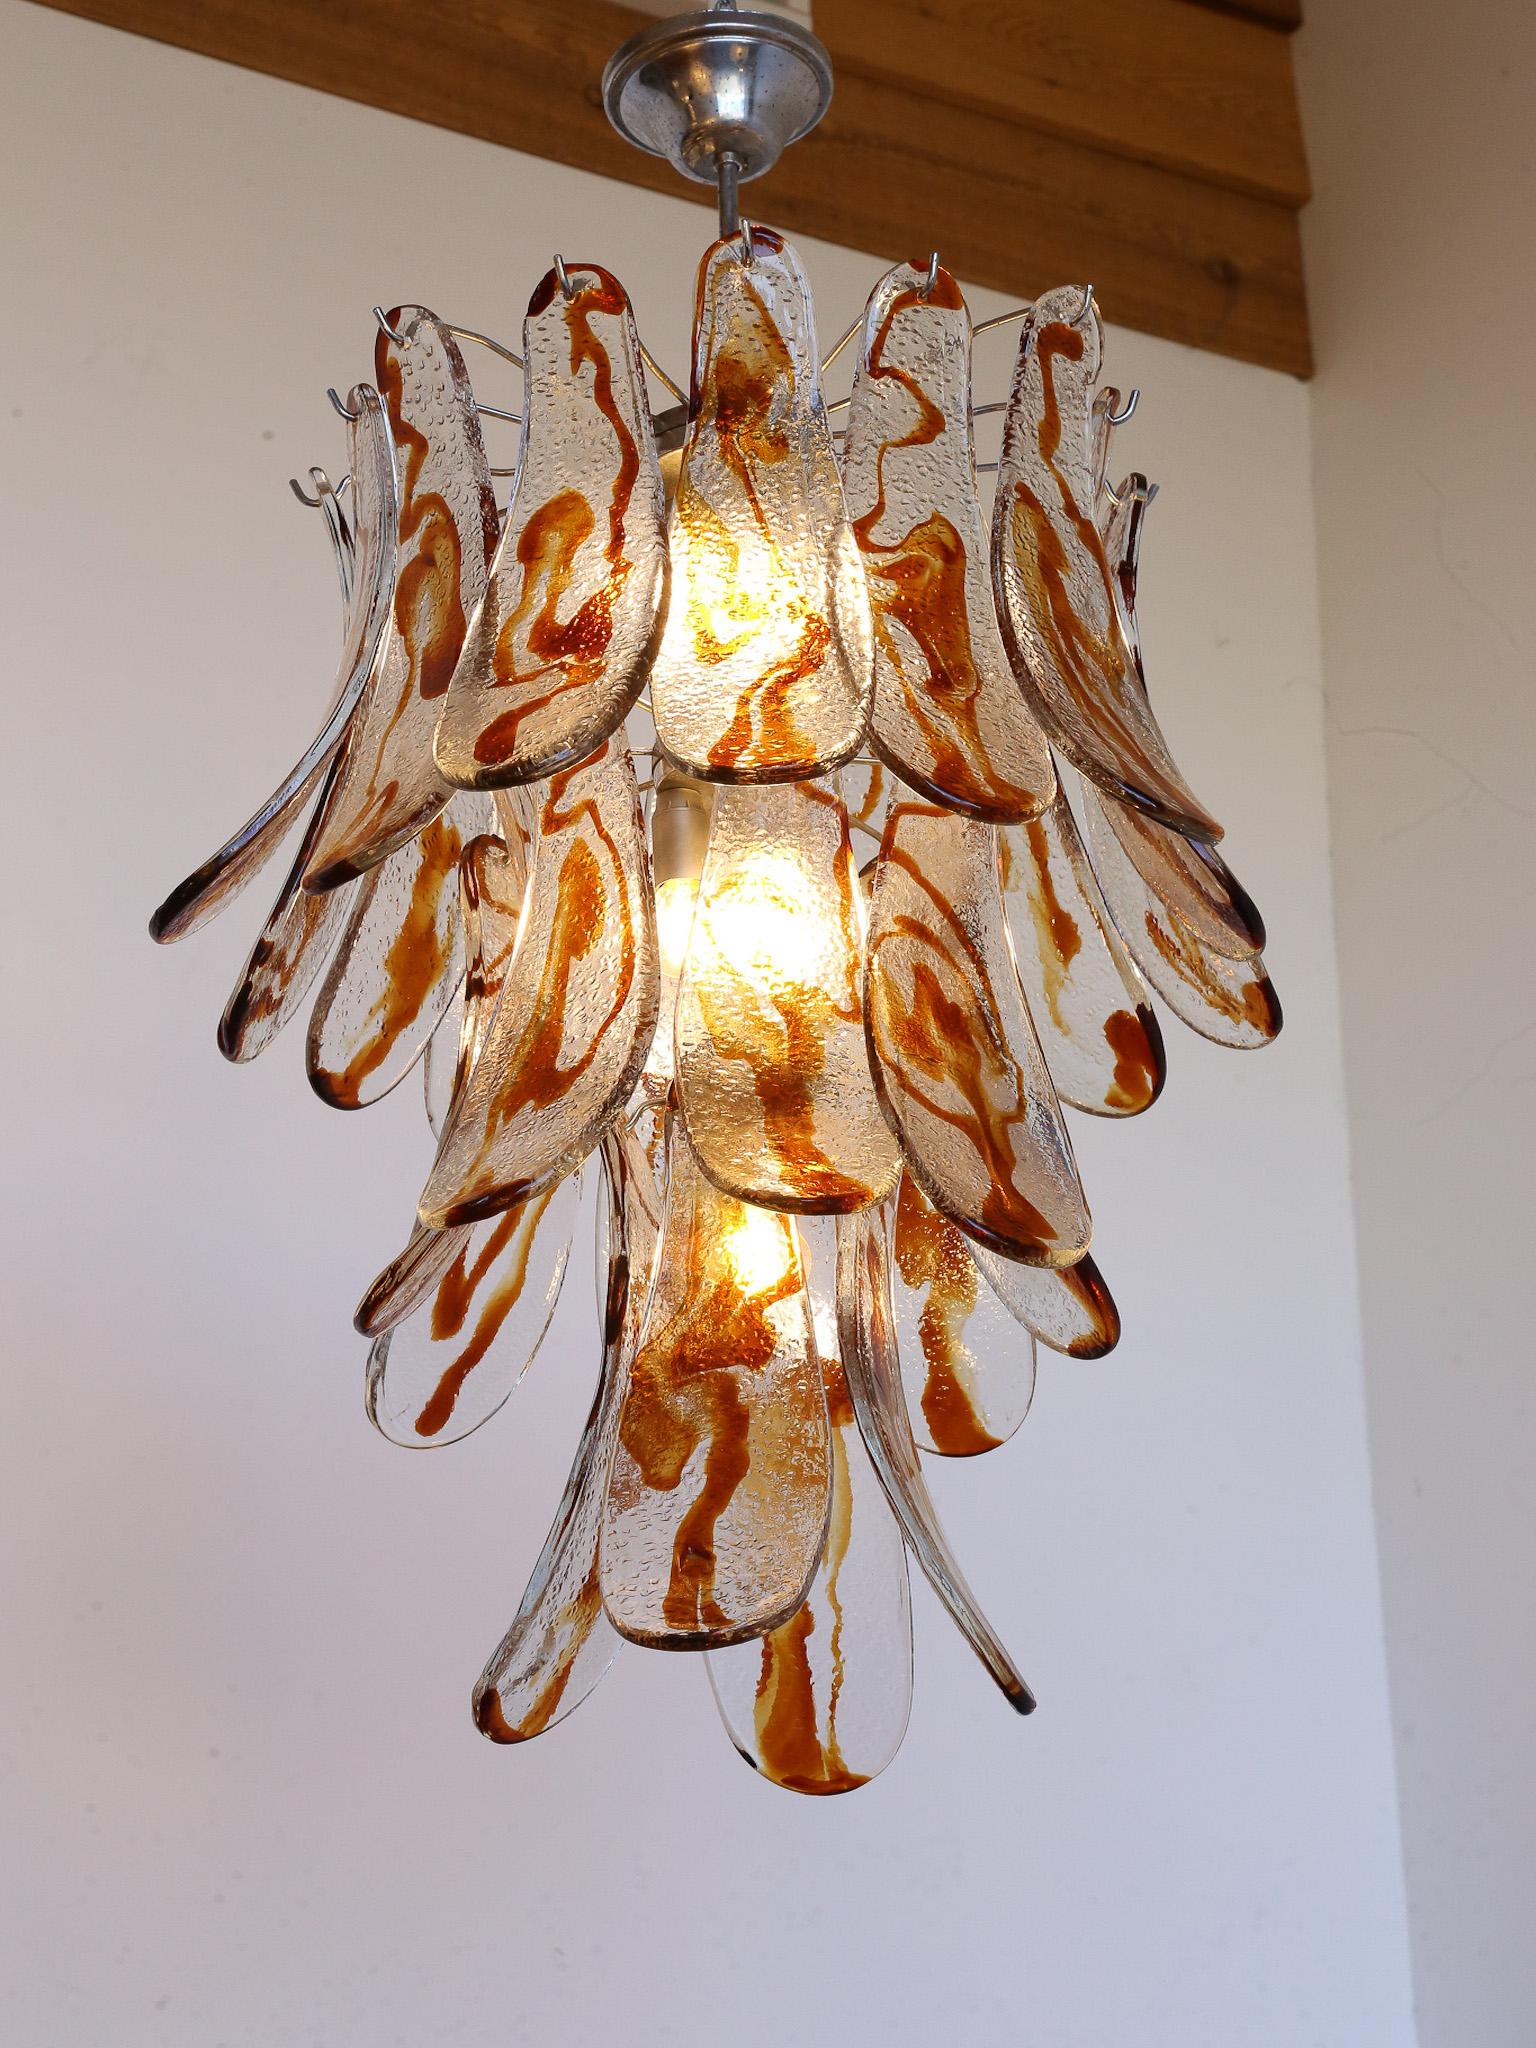 Amber Murano Glass and chrome pendant light with the total of twenty seven pieces, each saddle it's around 1 cm thick  

AV Mazzega, also known as Vetreria Mazzega, is an esteemed Italian glass manufacturer located in Murano, an island near Venice